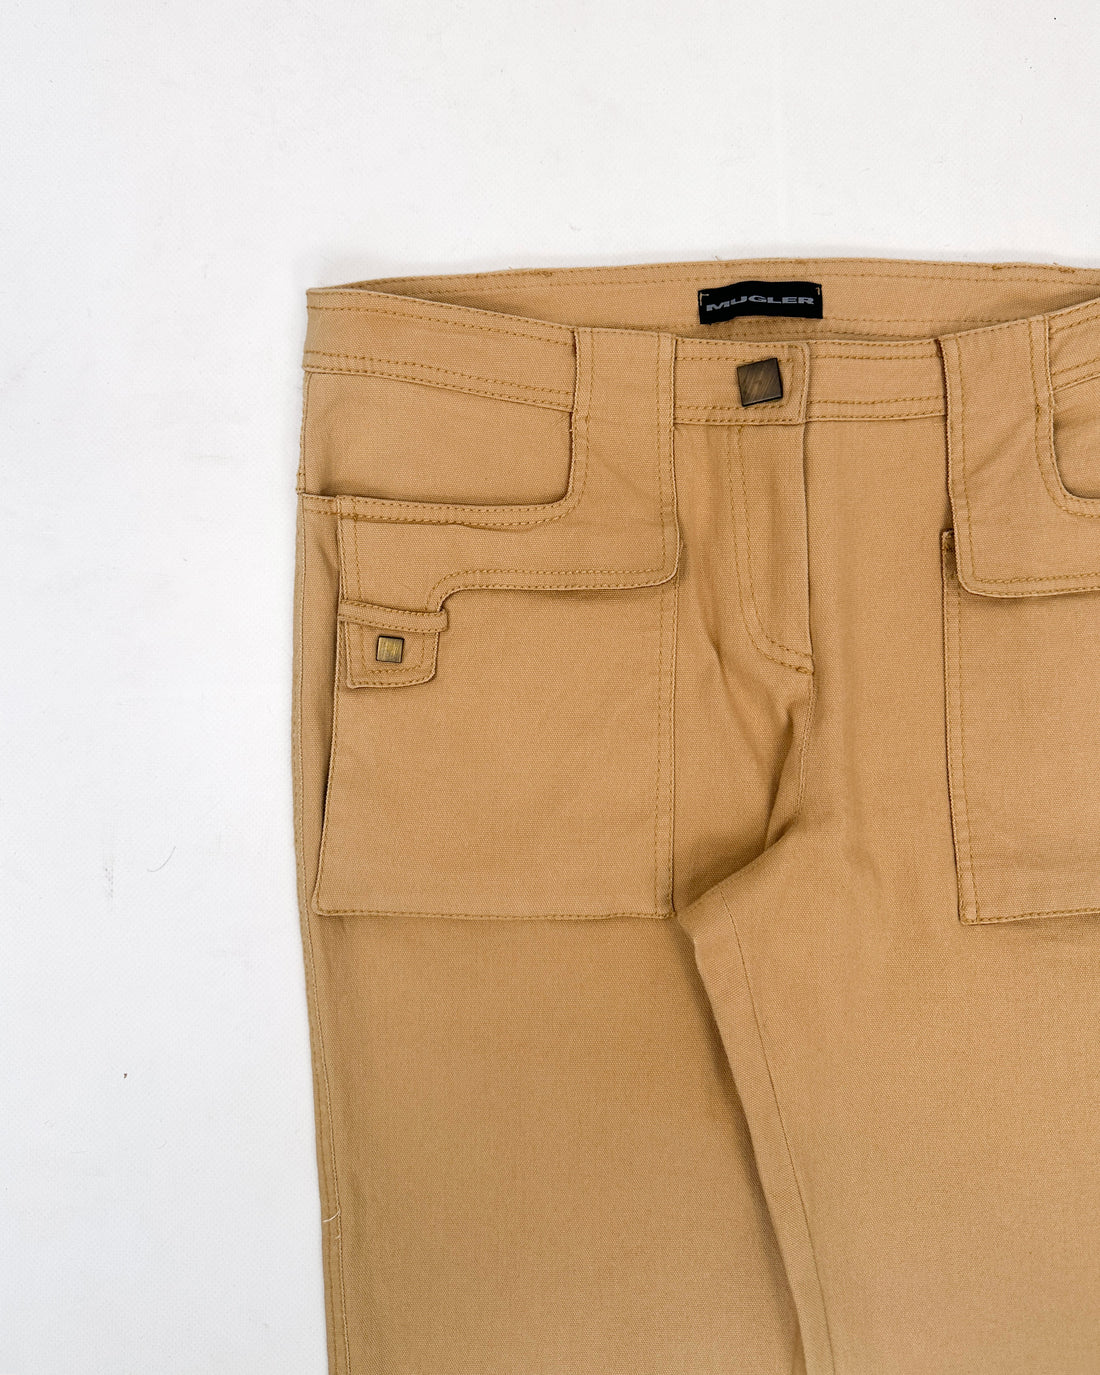 Thierry Mugler Doble Pocket Camel Straight Pants 2000's